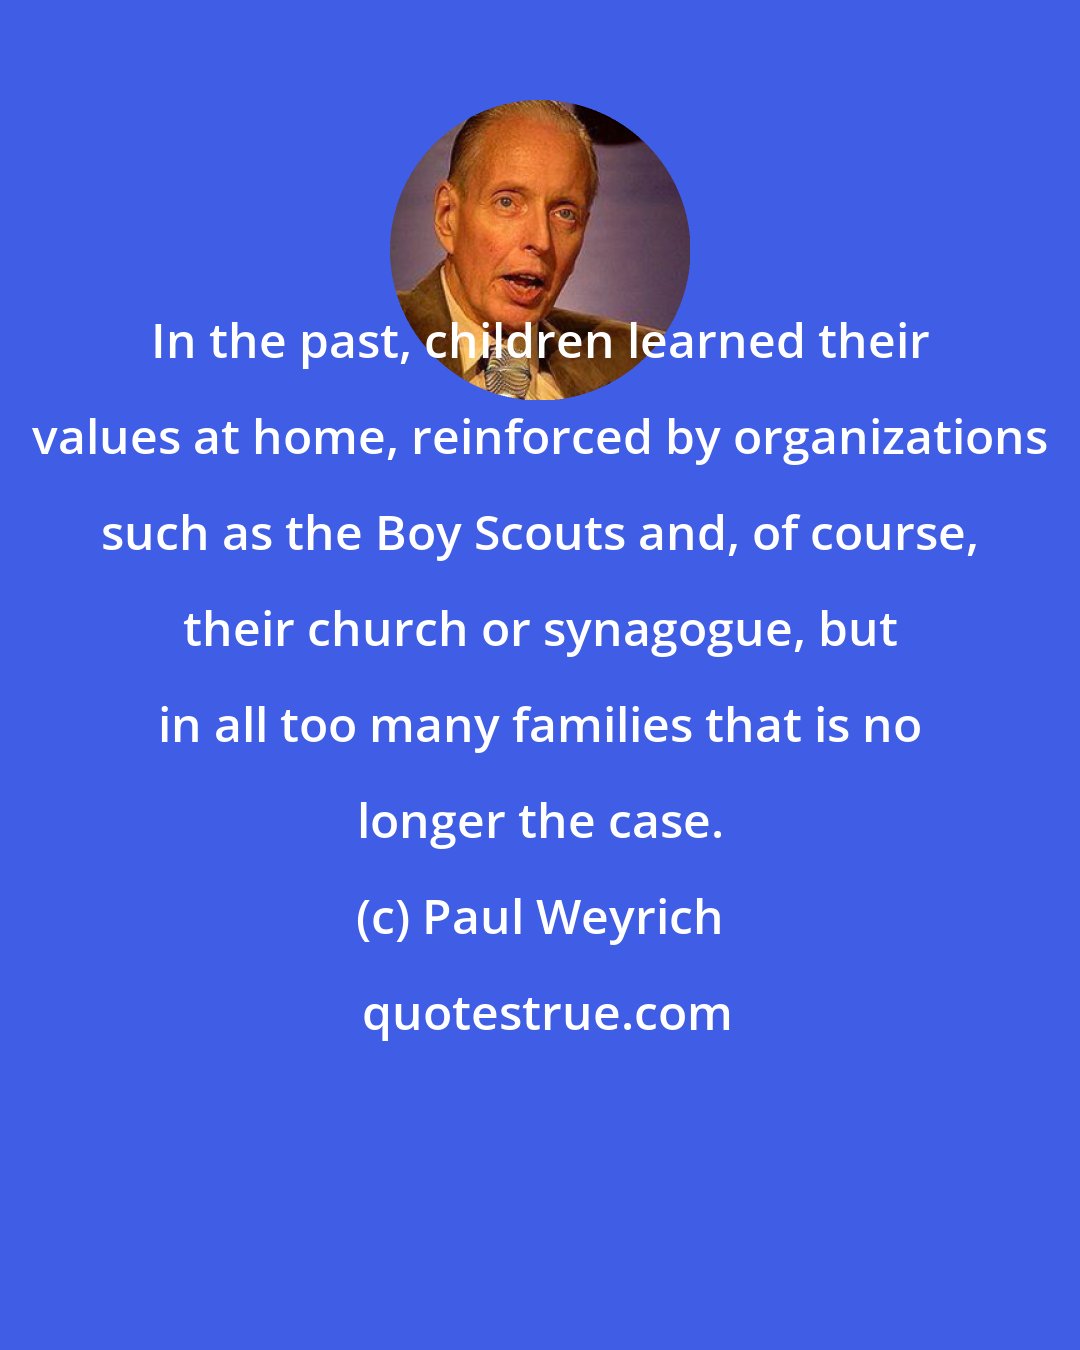 Paul Weyrich: In the past, children learned their values at home, reinforced by organizations such as the Boy Scouts and, of course, their church or synagogue, but in all too many families that is no longer the case.